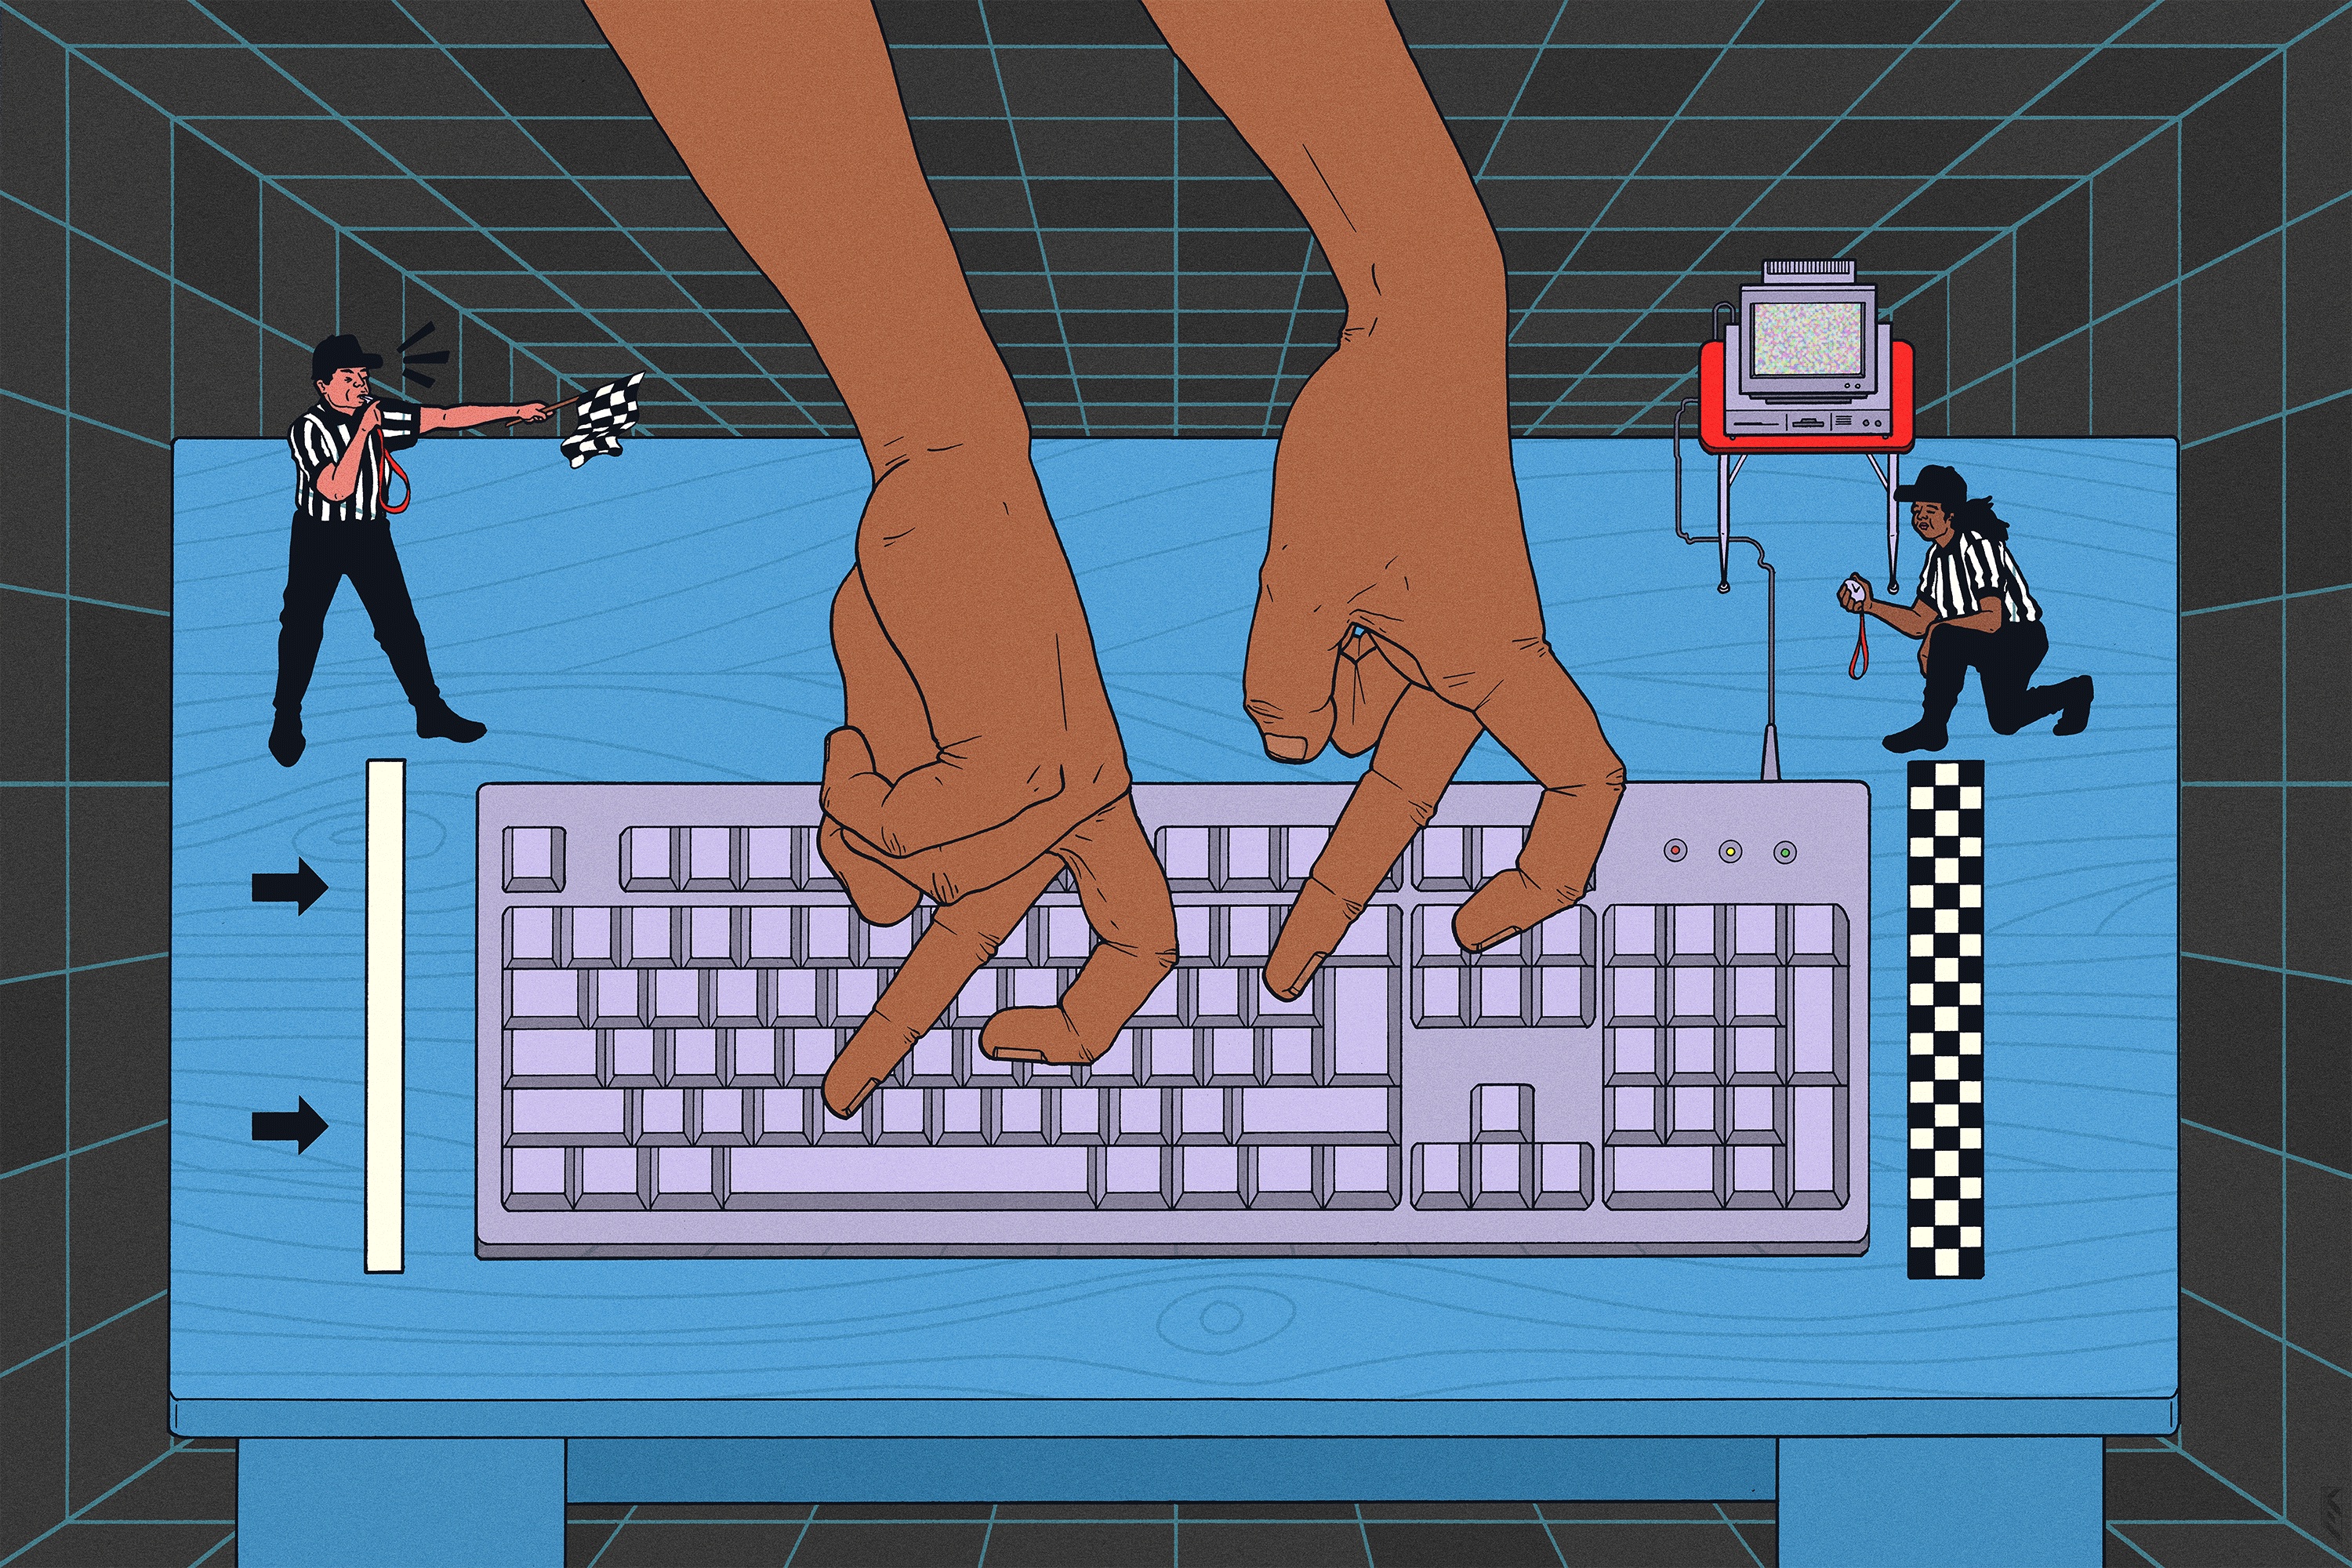 An illustration shows fingers crawling across a keyboard